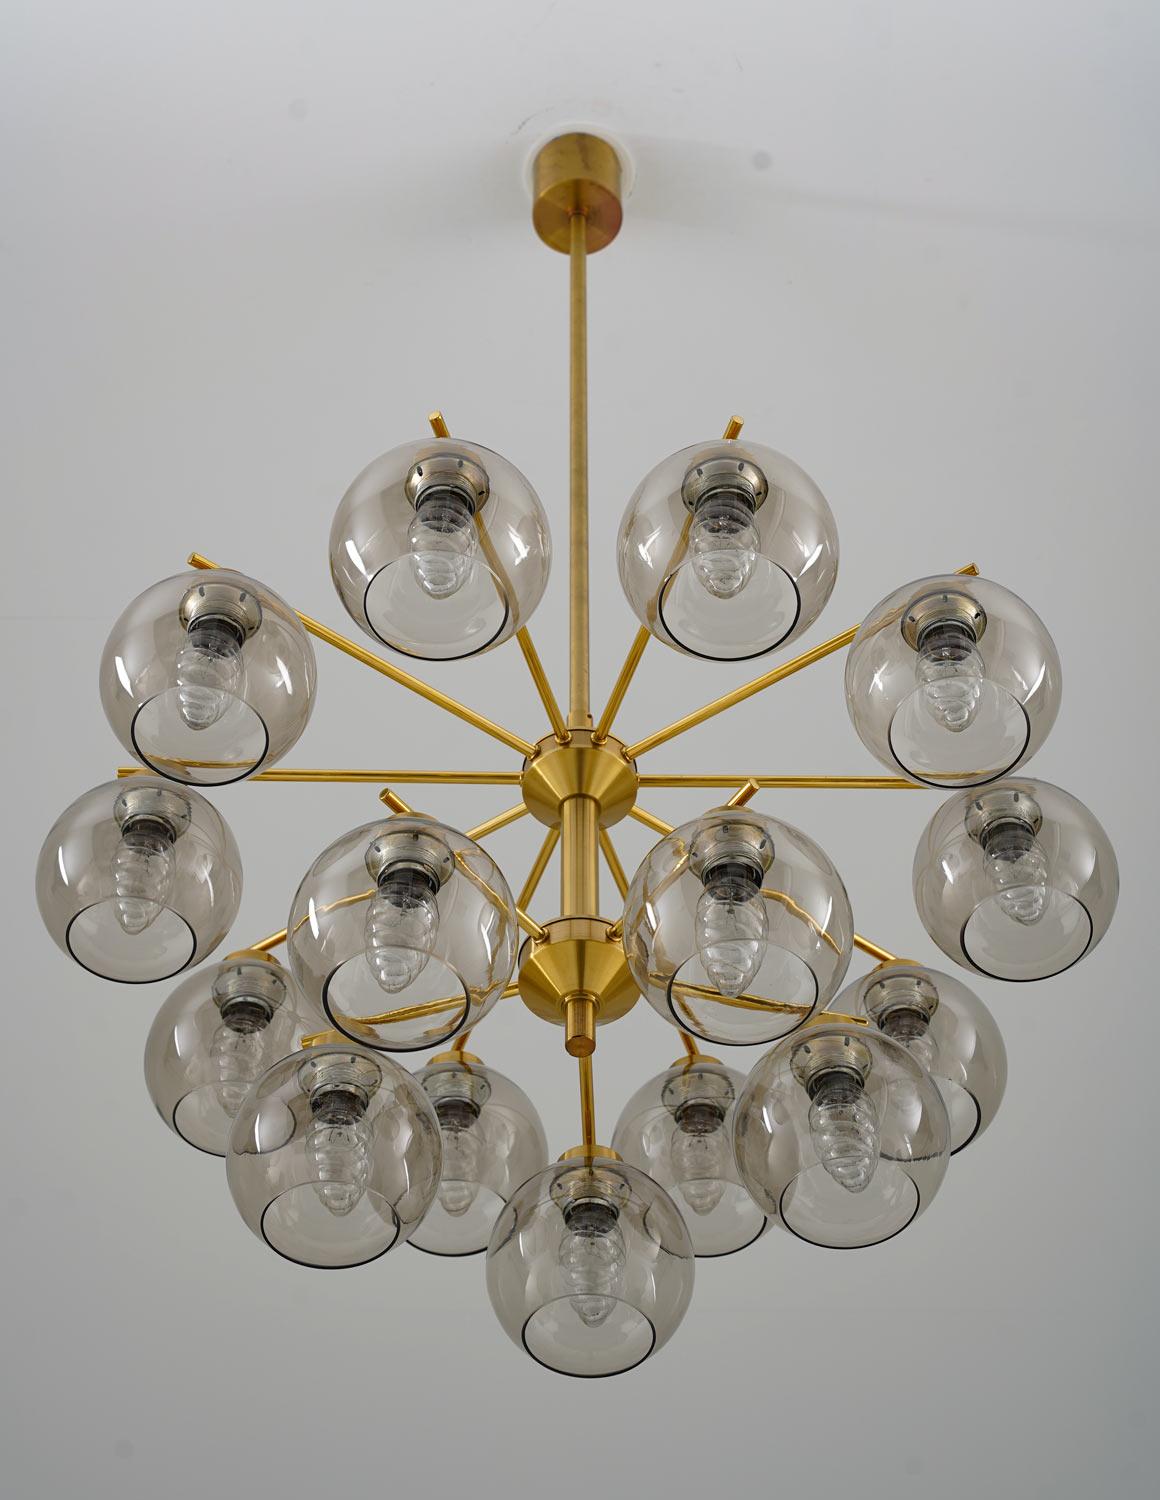 Swedish Chandeliers in Brass and Glass by Holger Johansson In Good Condition For Sale In Karlstad, SE